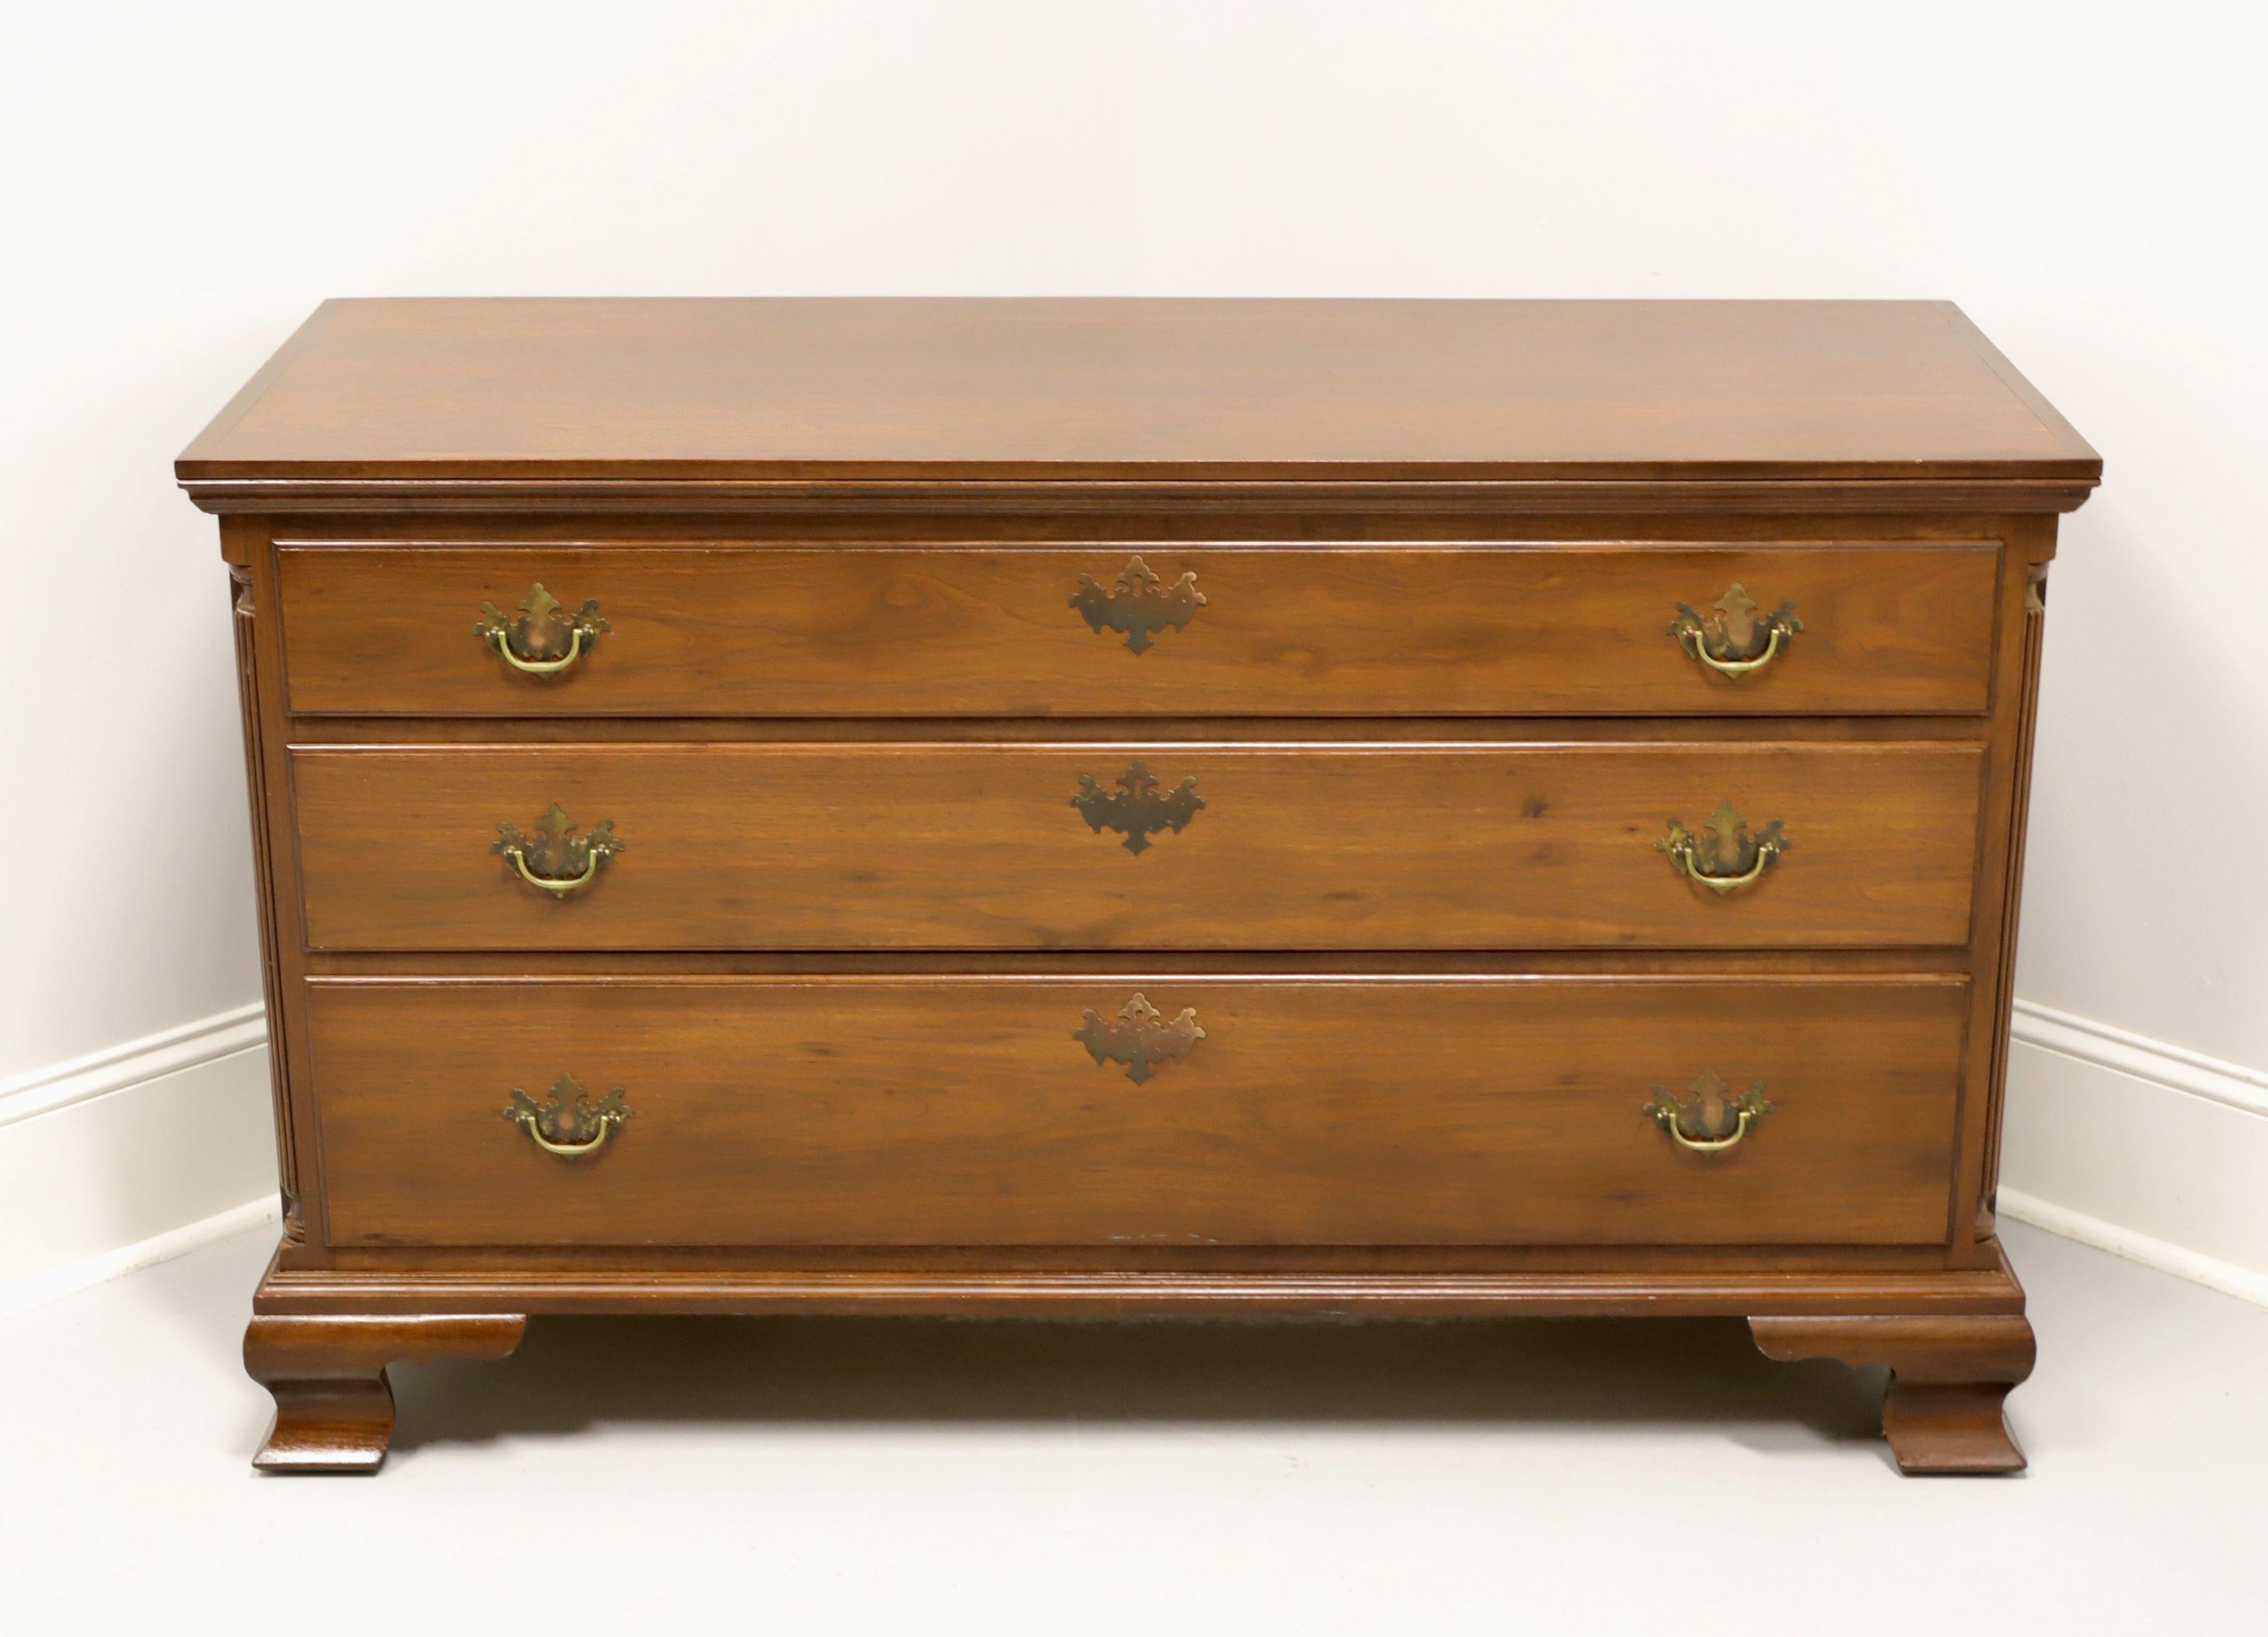 A Chippendale style single dresser by McSwain's Handcrafted Furniture, a custom furniture maker located in Charlotte, North Carolina, USA. Solid walnut with brass hardware, fluted columns to sides and ogee bracket feet. Features three drawers of